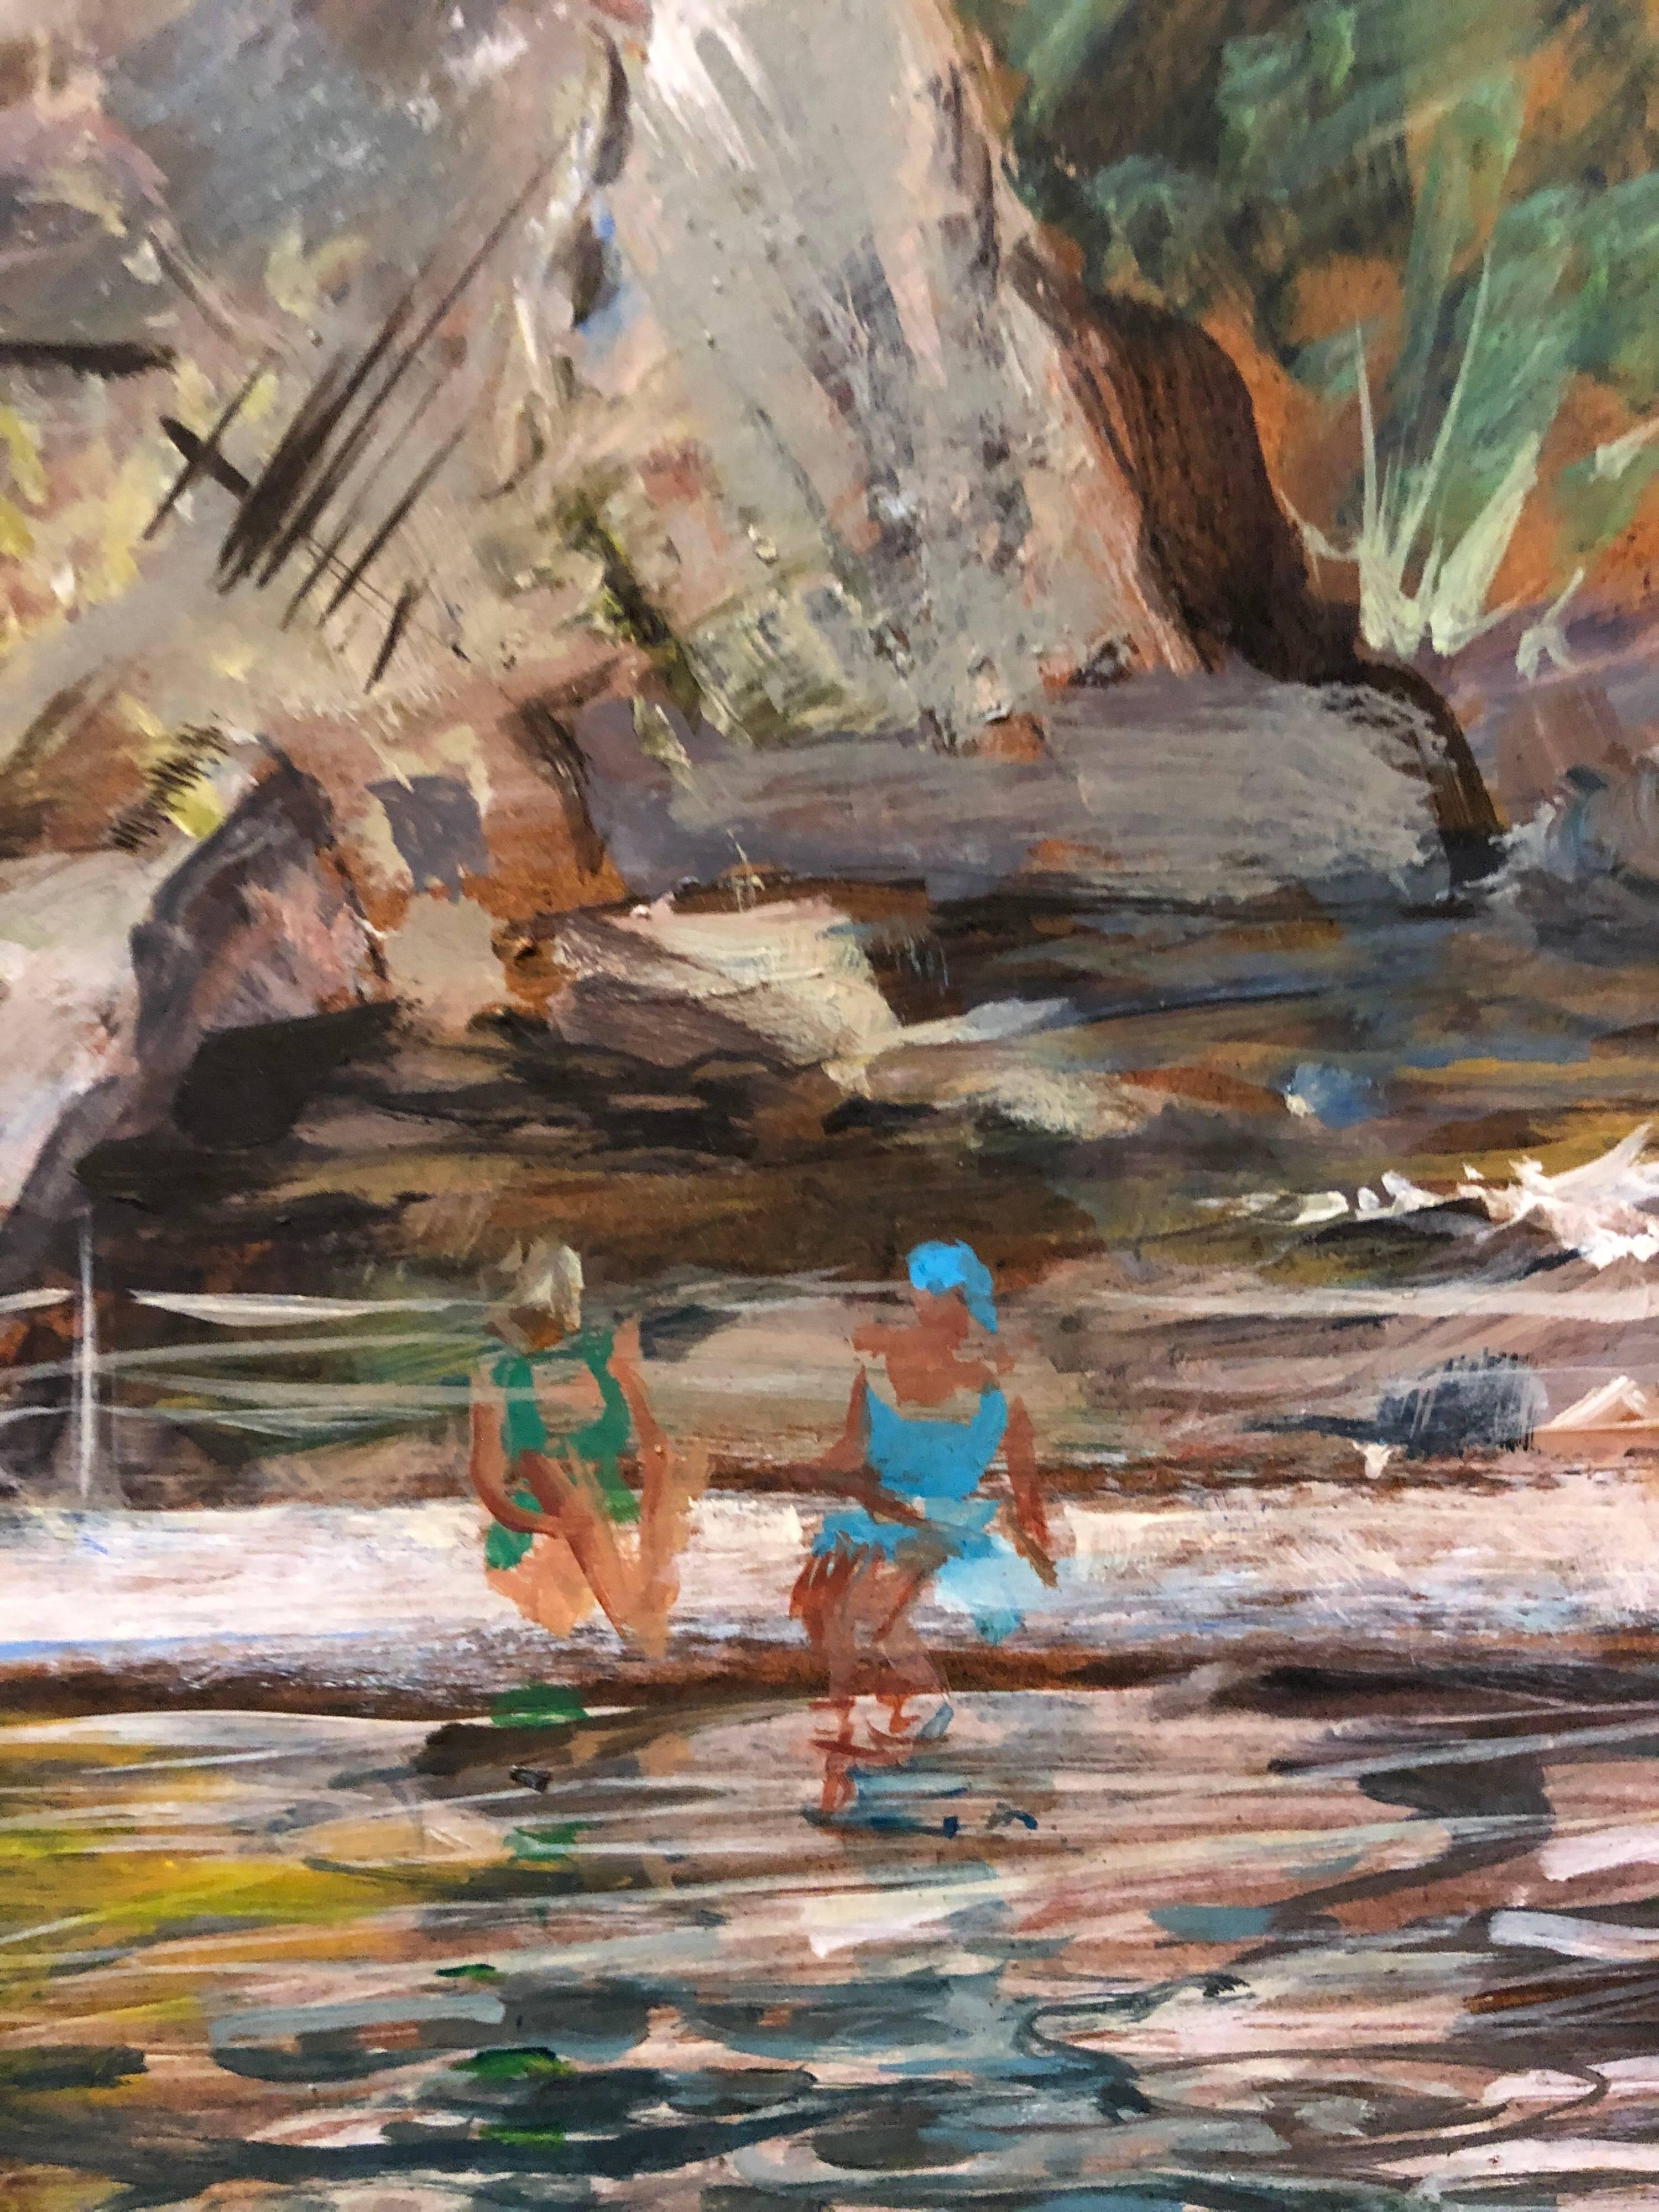 Bathers at the Quarry 1940s American Modernist Oil Painting WPA era - Gray Landscape Painting by Theresa Berney Loew